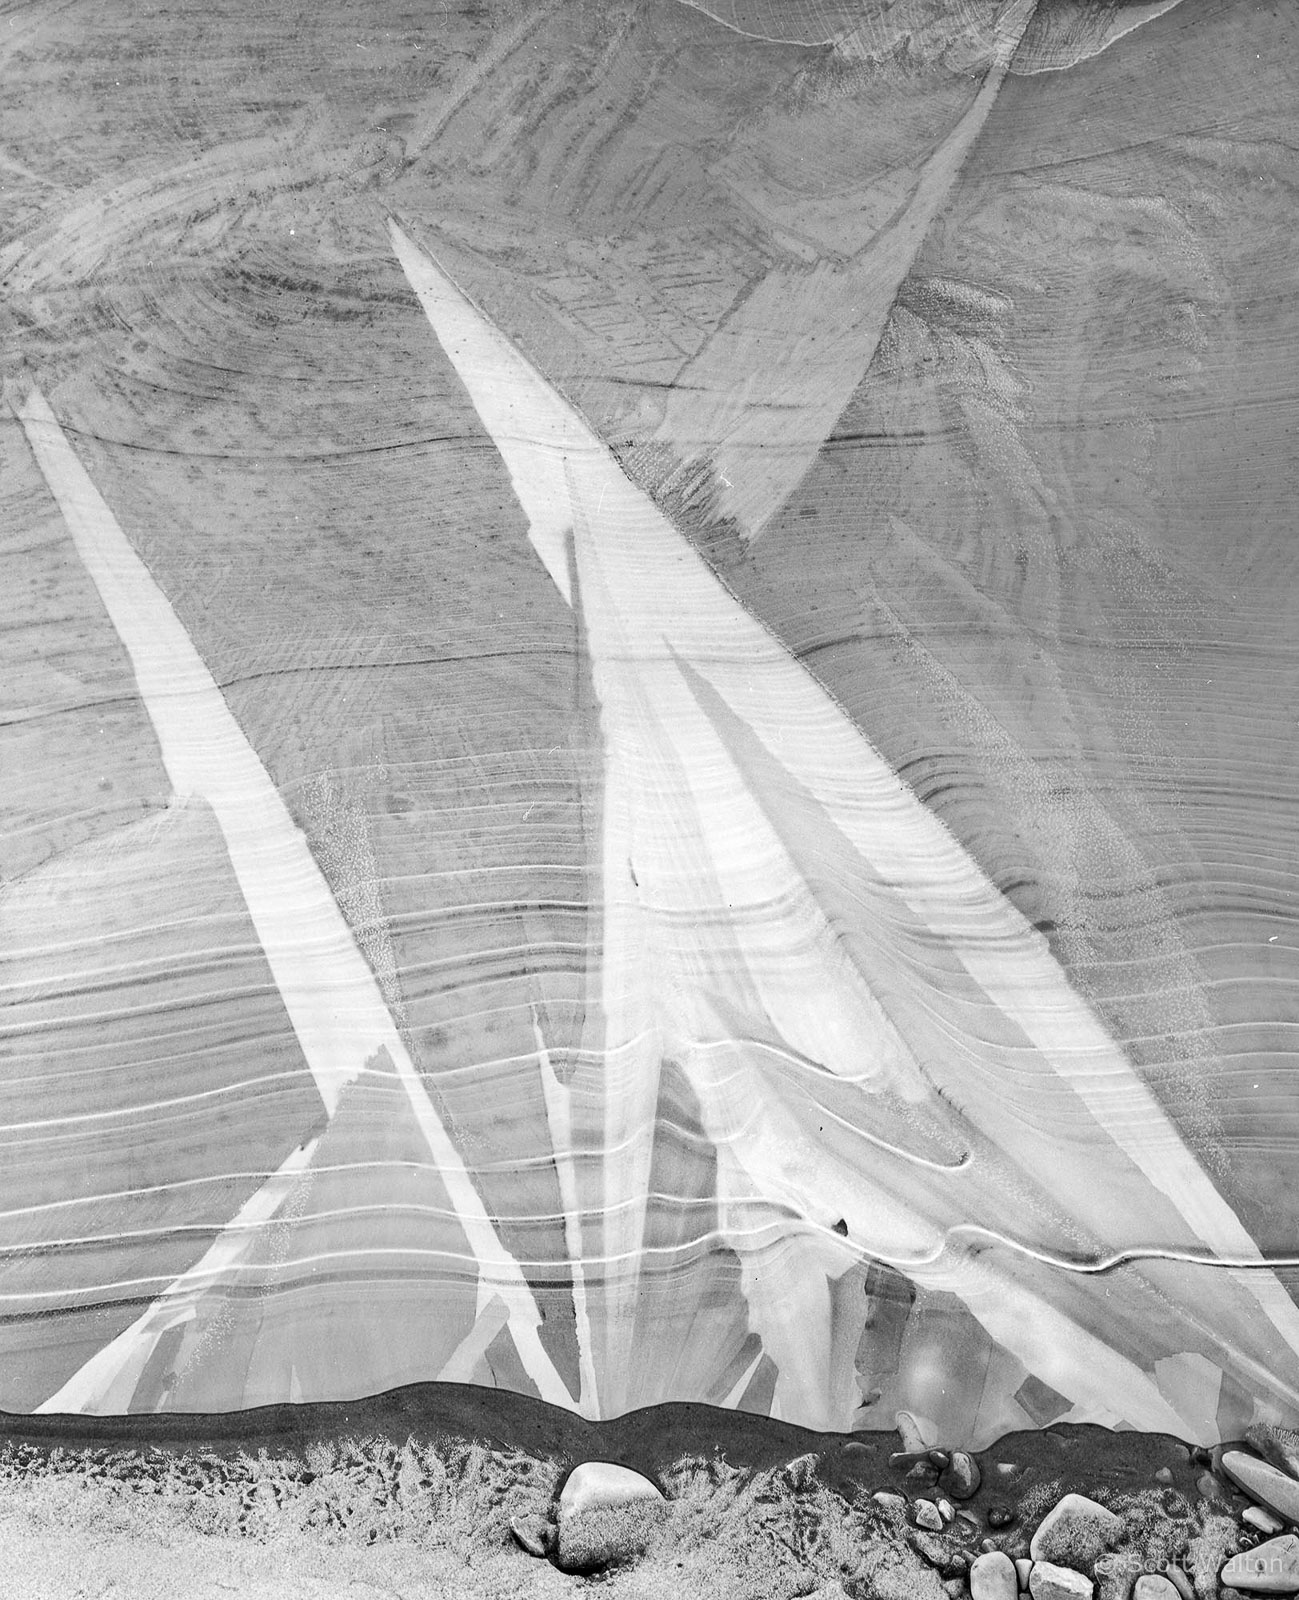 Zion-Washes-IceDetail-1-tmax100.jpg